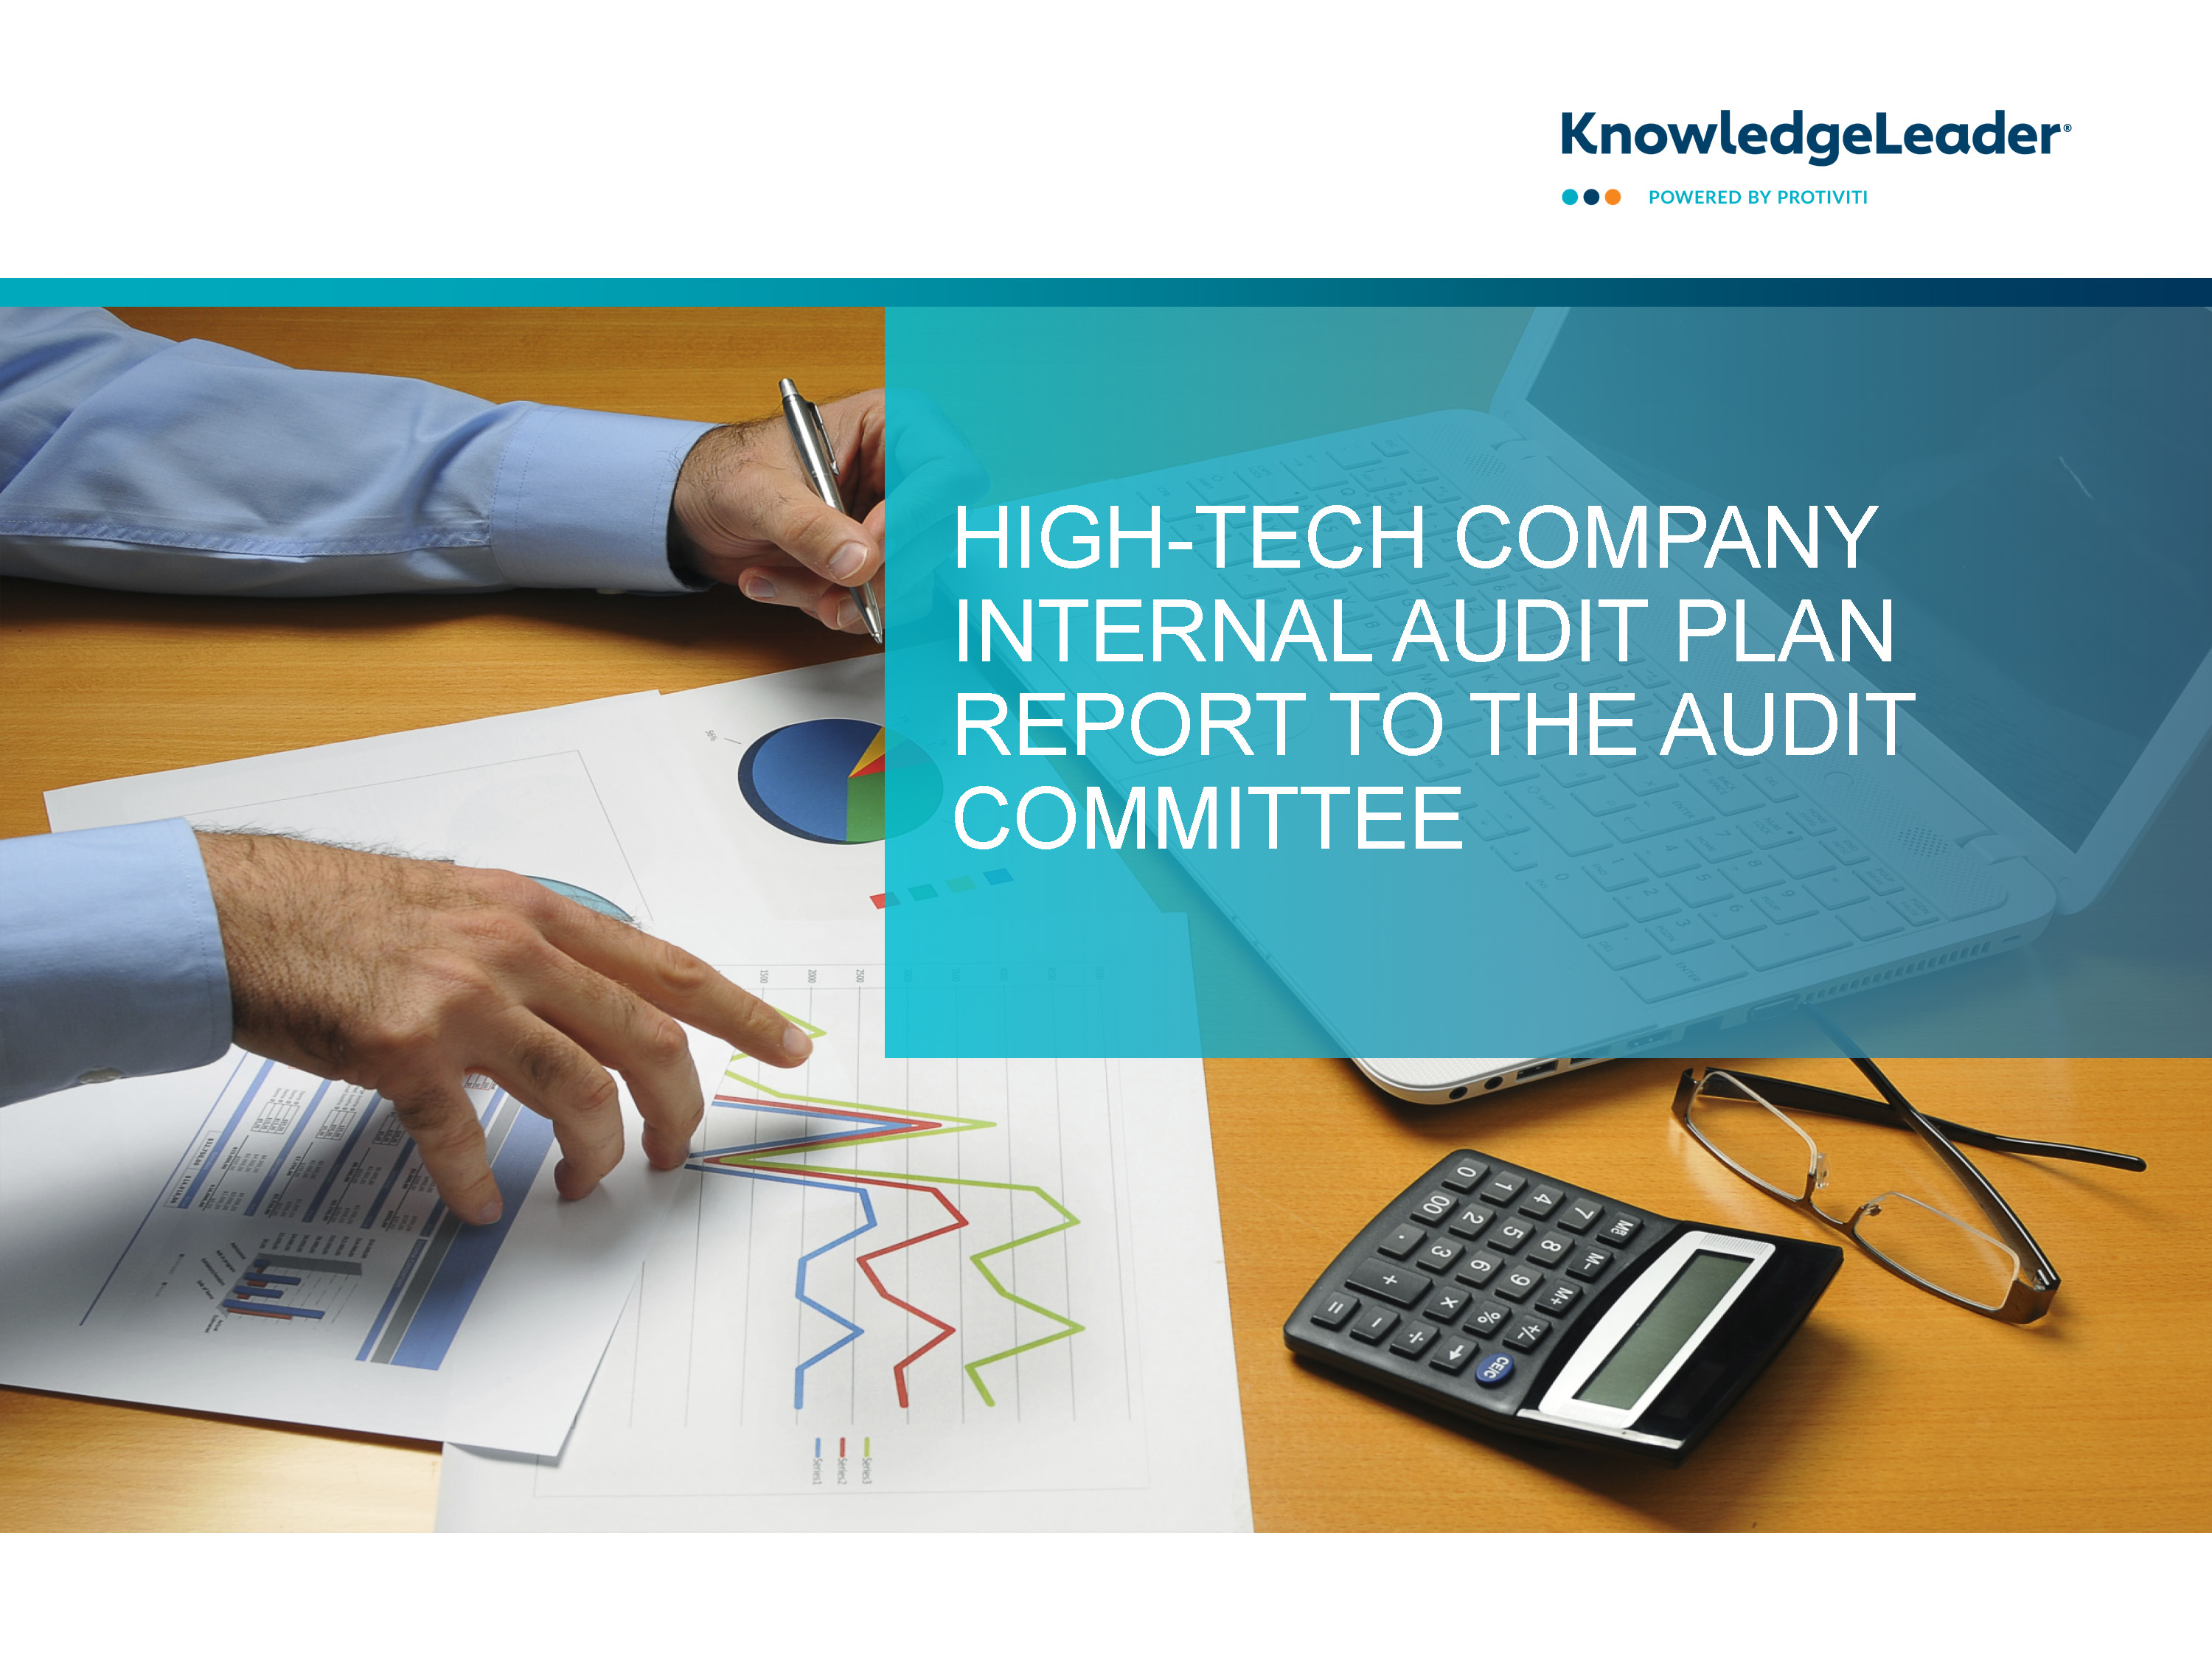 High-Tech Company Internal Audit Plan Report to the Audit Committee